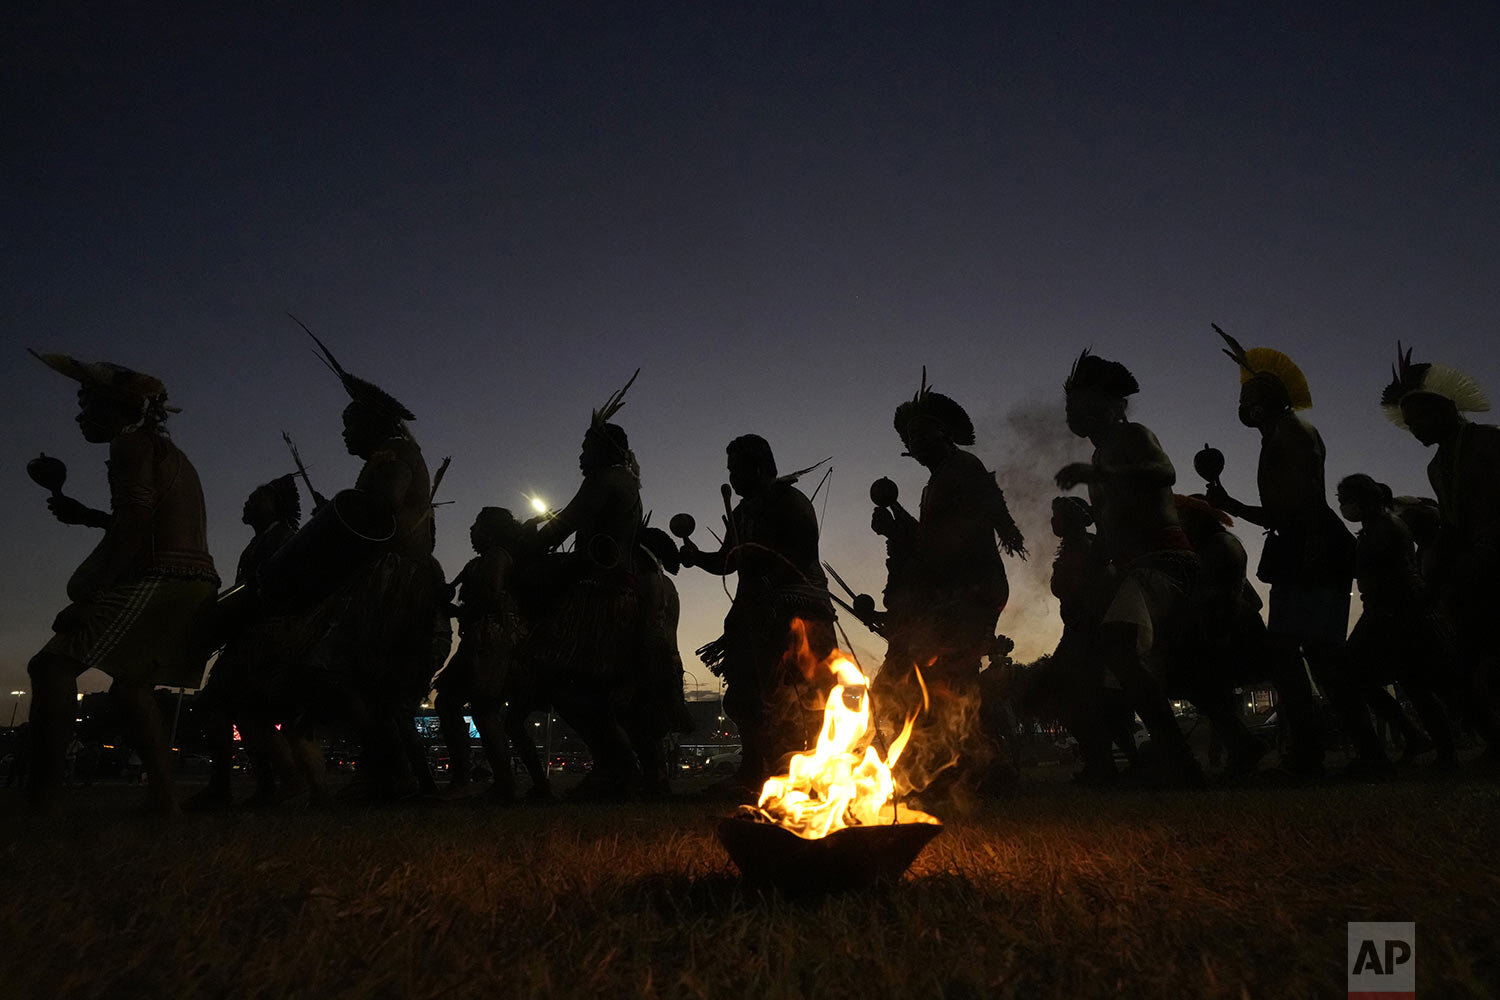  Indigenous men perform a ritual dance as Indigenous groups set up the "Luta pela Vida" or Struggle for Life camp, in Brasilia, Brazil, Aug. 23, 2021, during a weeklong mobilization to protest a Supreme Court ruling that could undermine rights to the